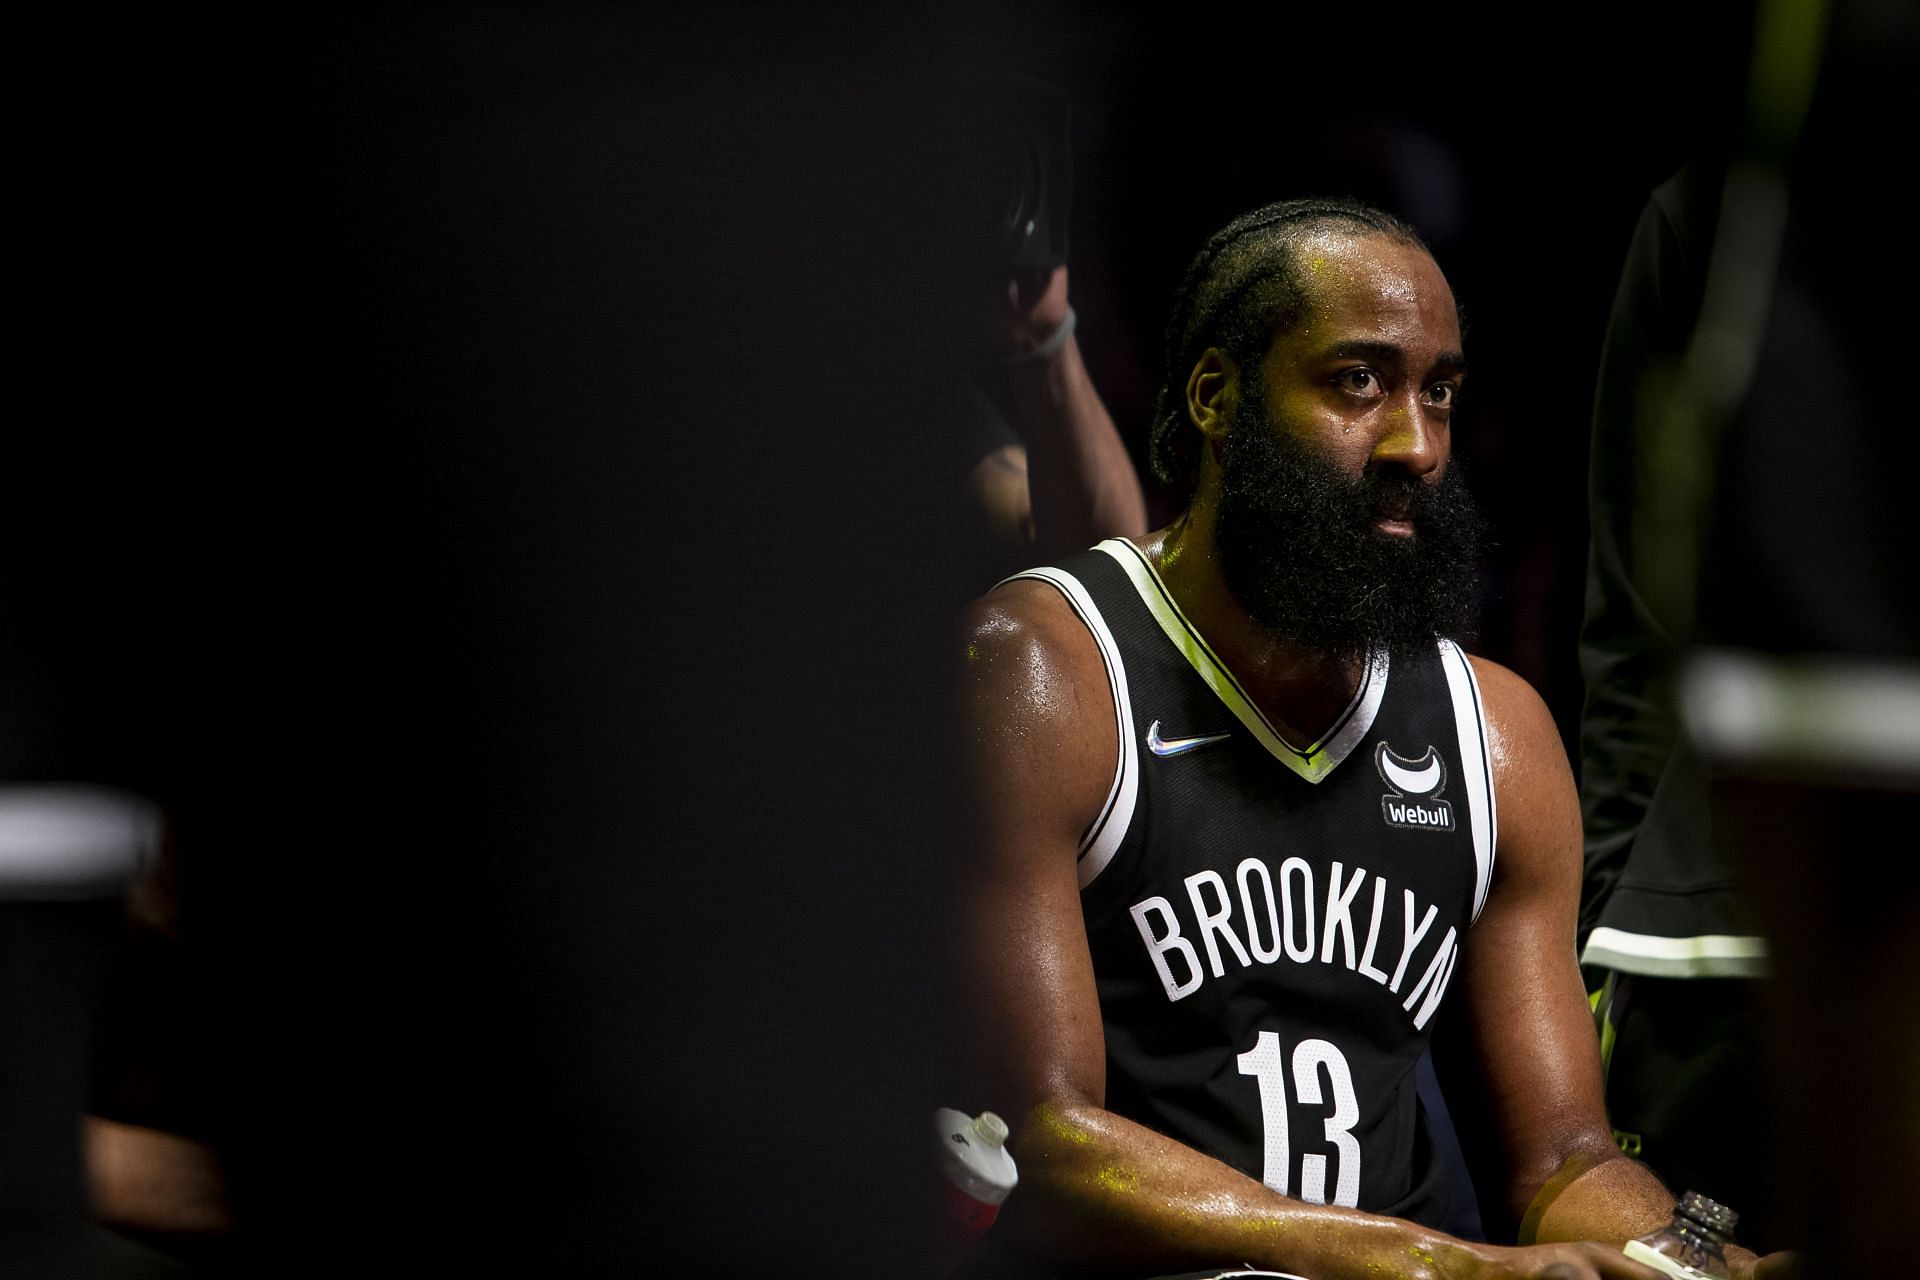 James Harden of the Brooklyn Nets rests on the bench during a timeout.